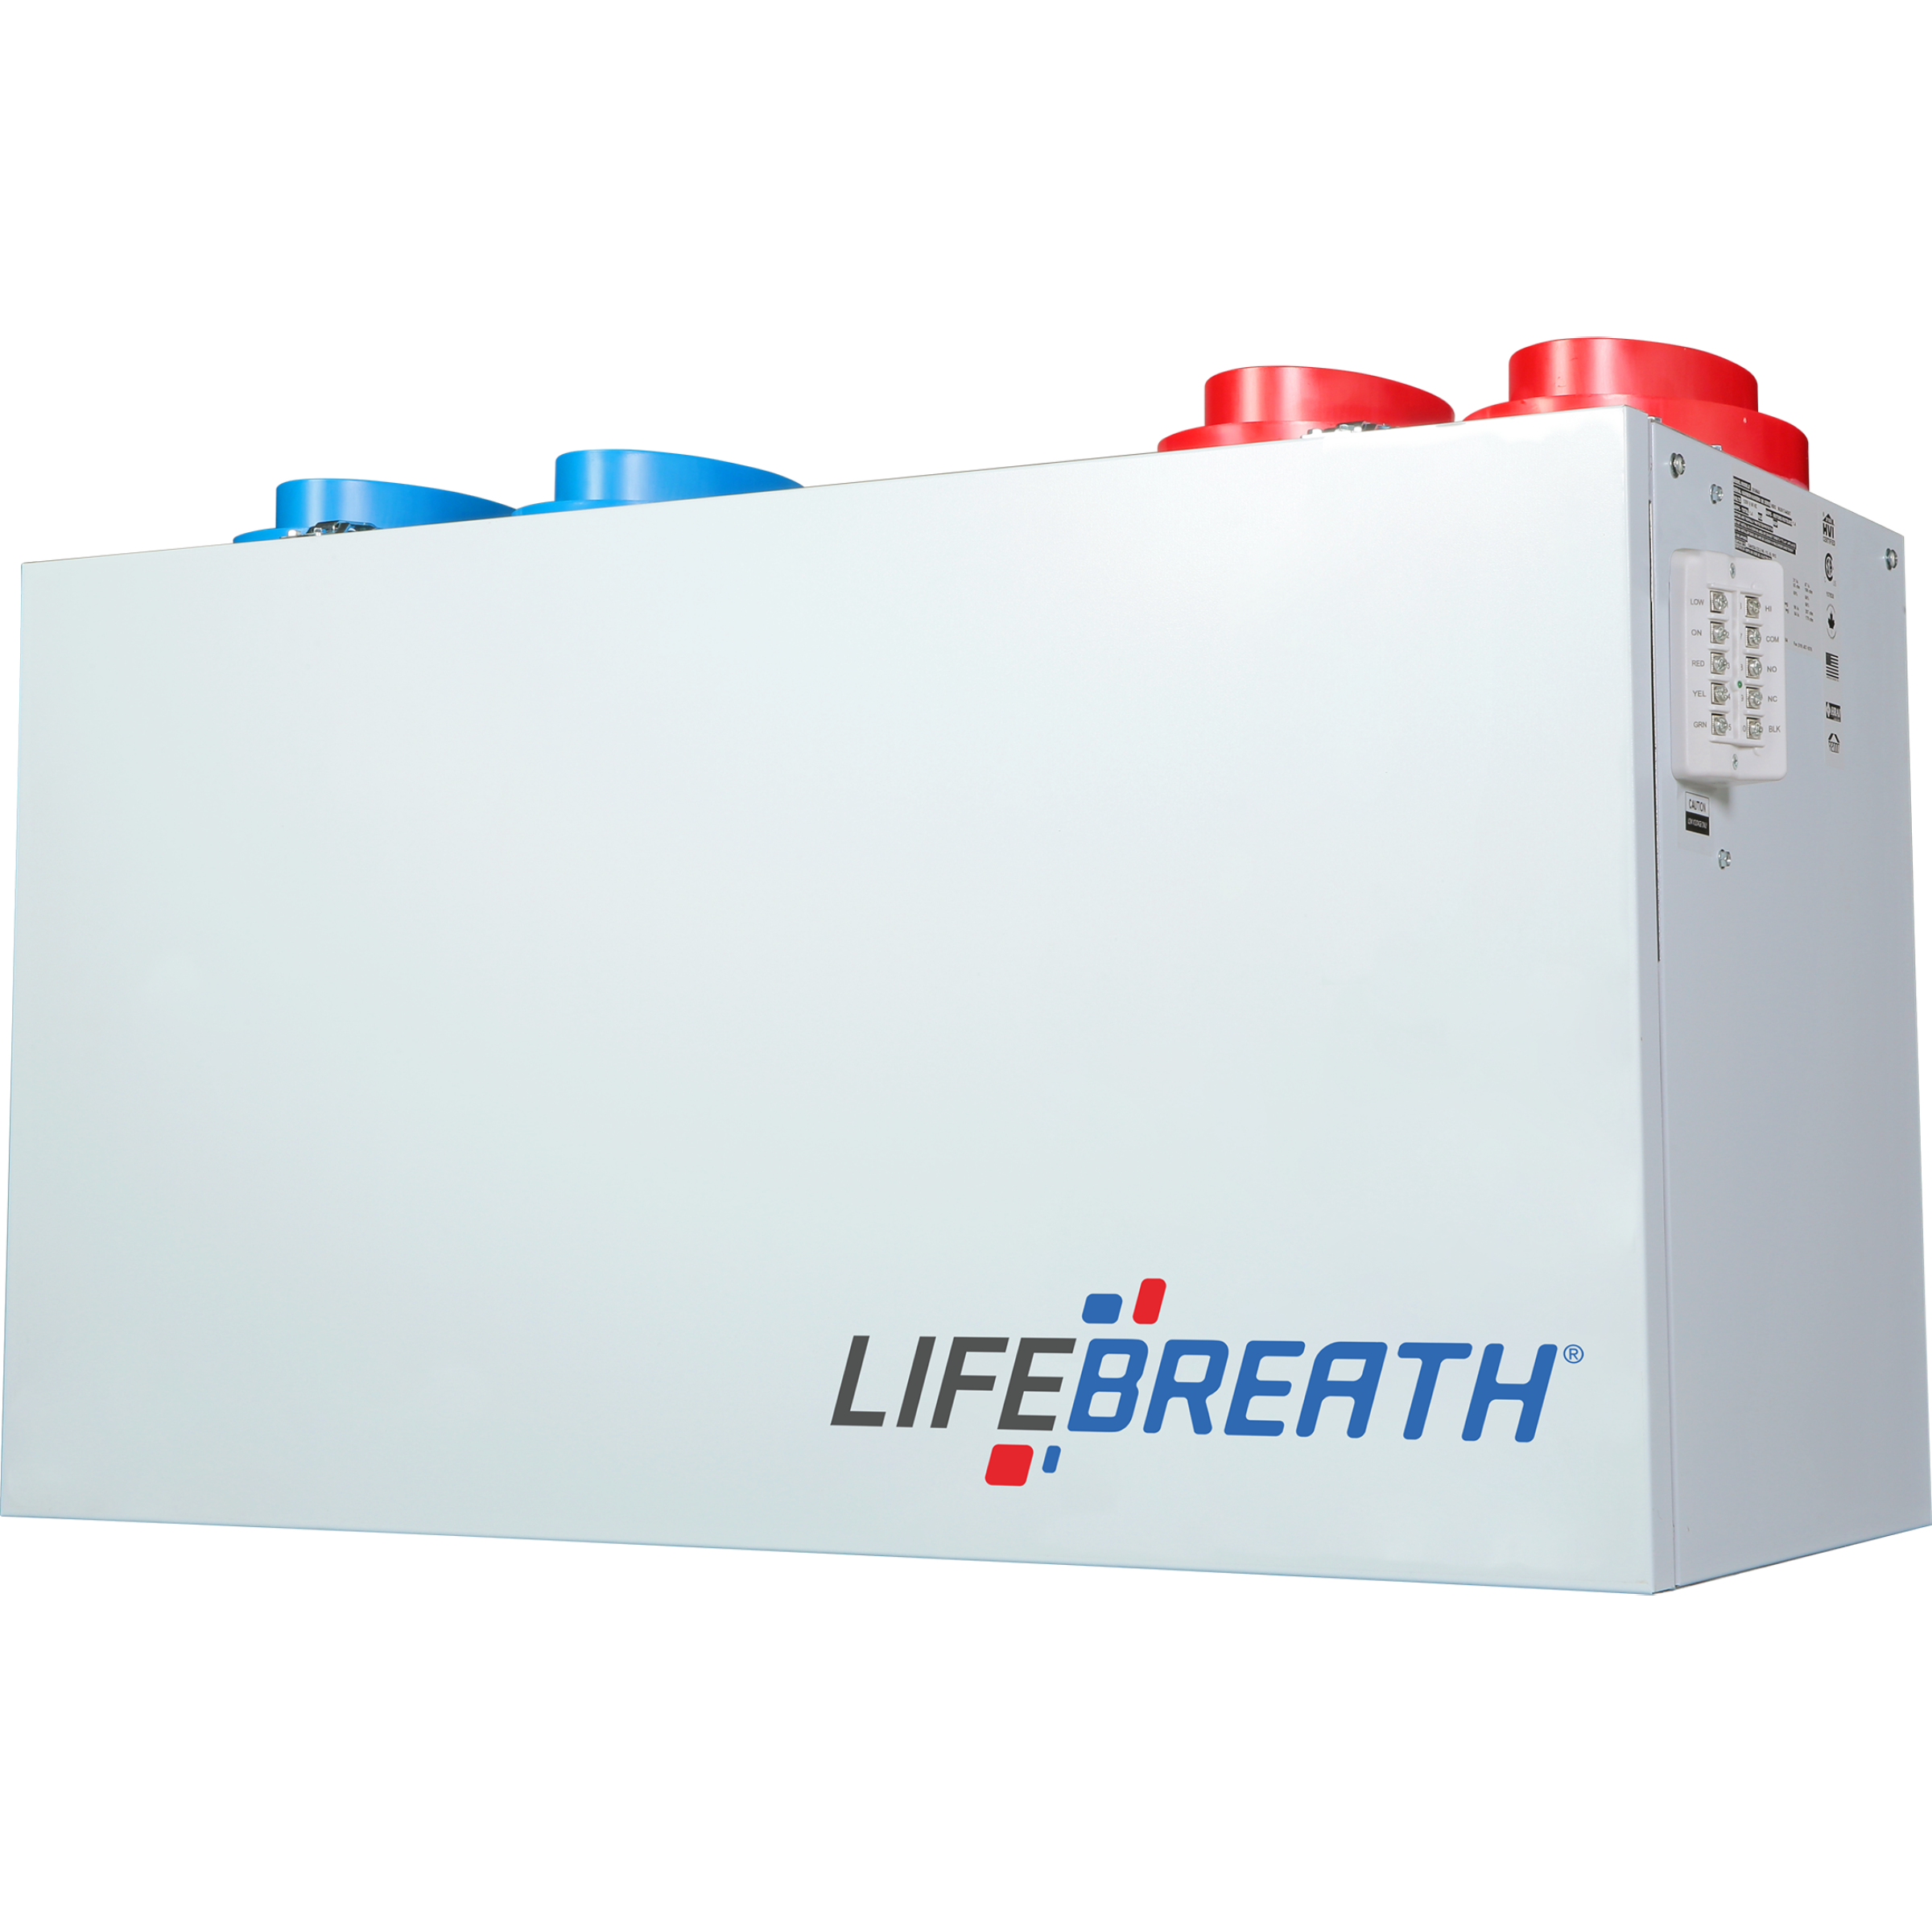 205 MAX Lifebreath Residential Heat Recovery Ventilator (HRV), 179 CFM, 120 V, Frequency 60 HZ, Controller Included